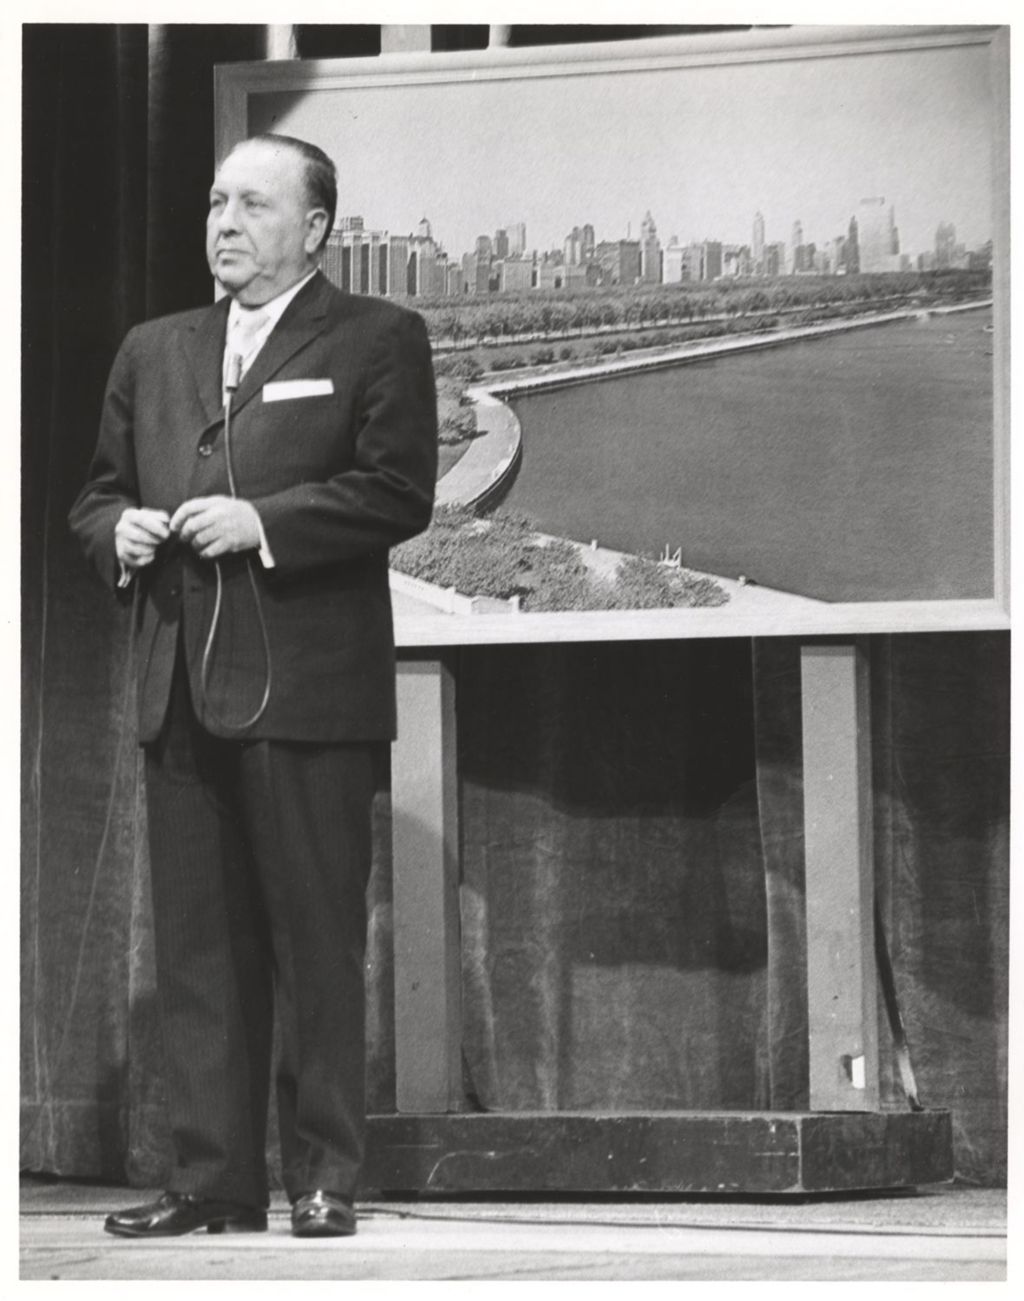 Miniature of Richard J. Daley with a photo of the Chicago lakefront